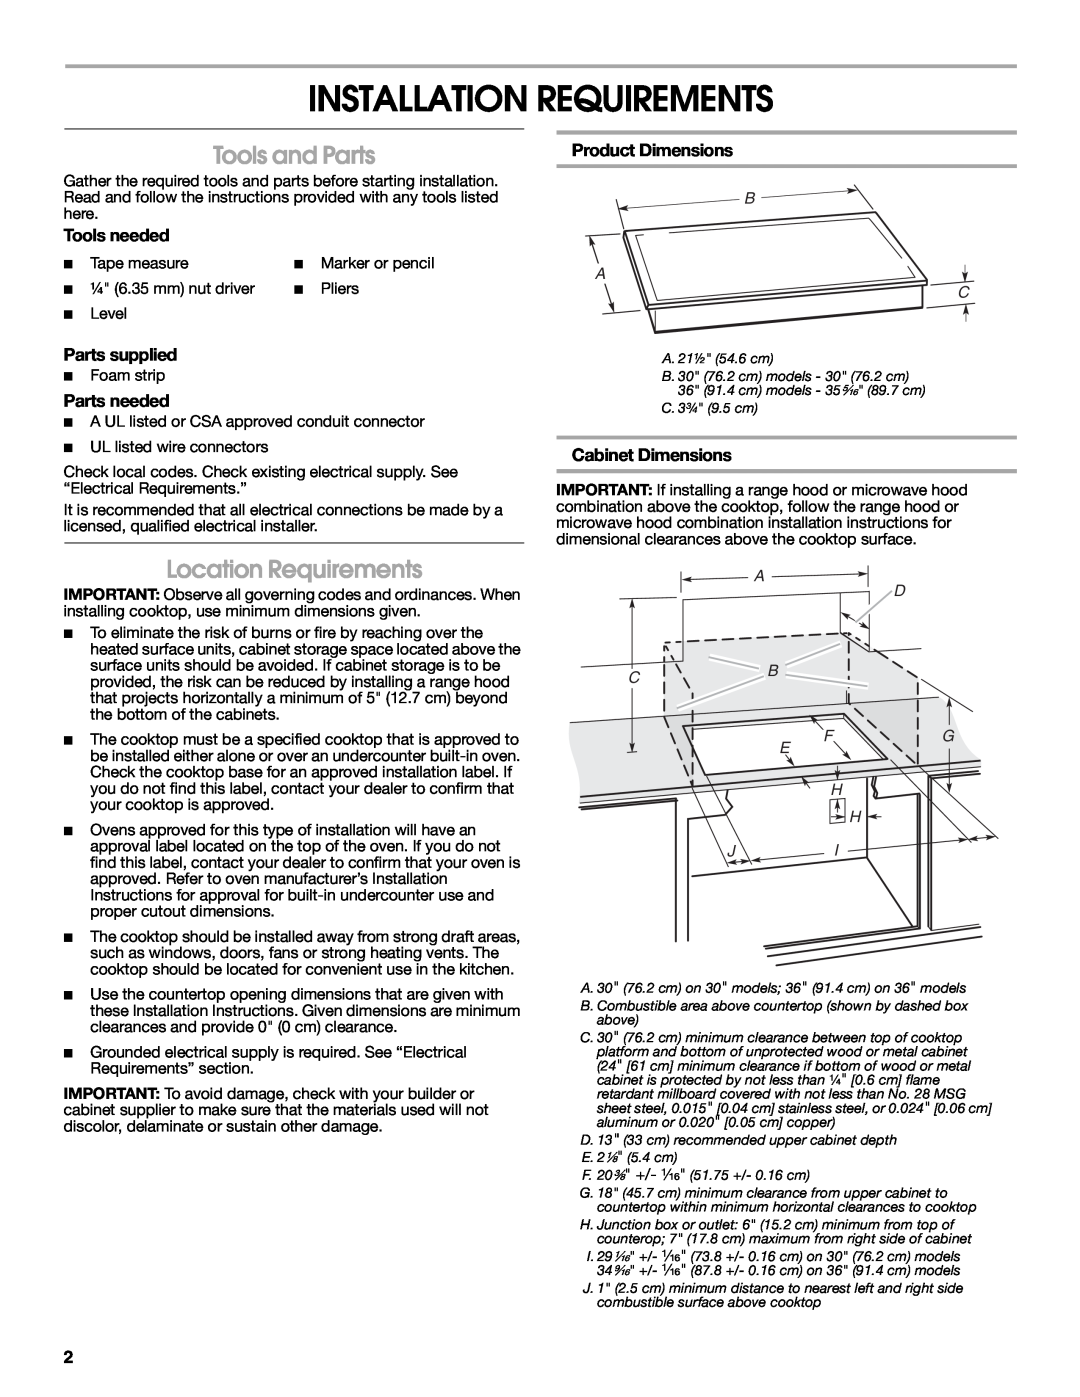 Maytag W10274255A Installation Requirements, Tools and Parts, Location Requirements, Tools needed, Parts supplied, B A C 